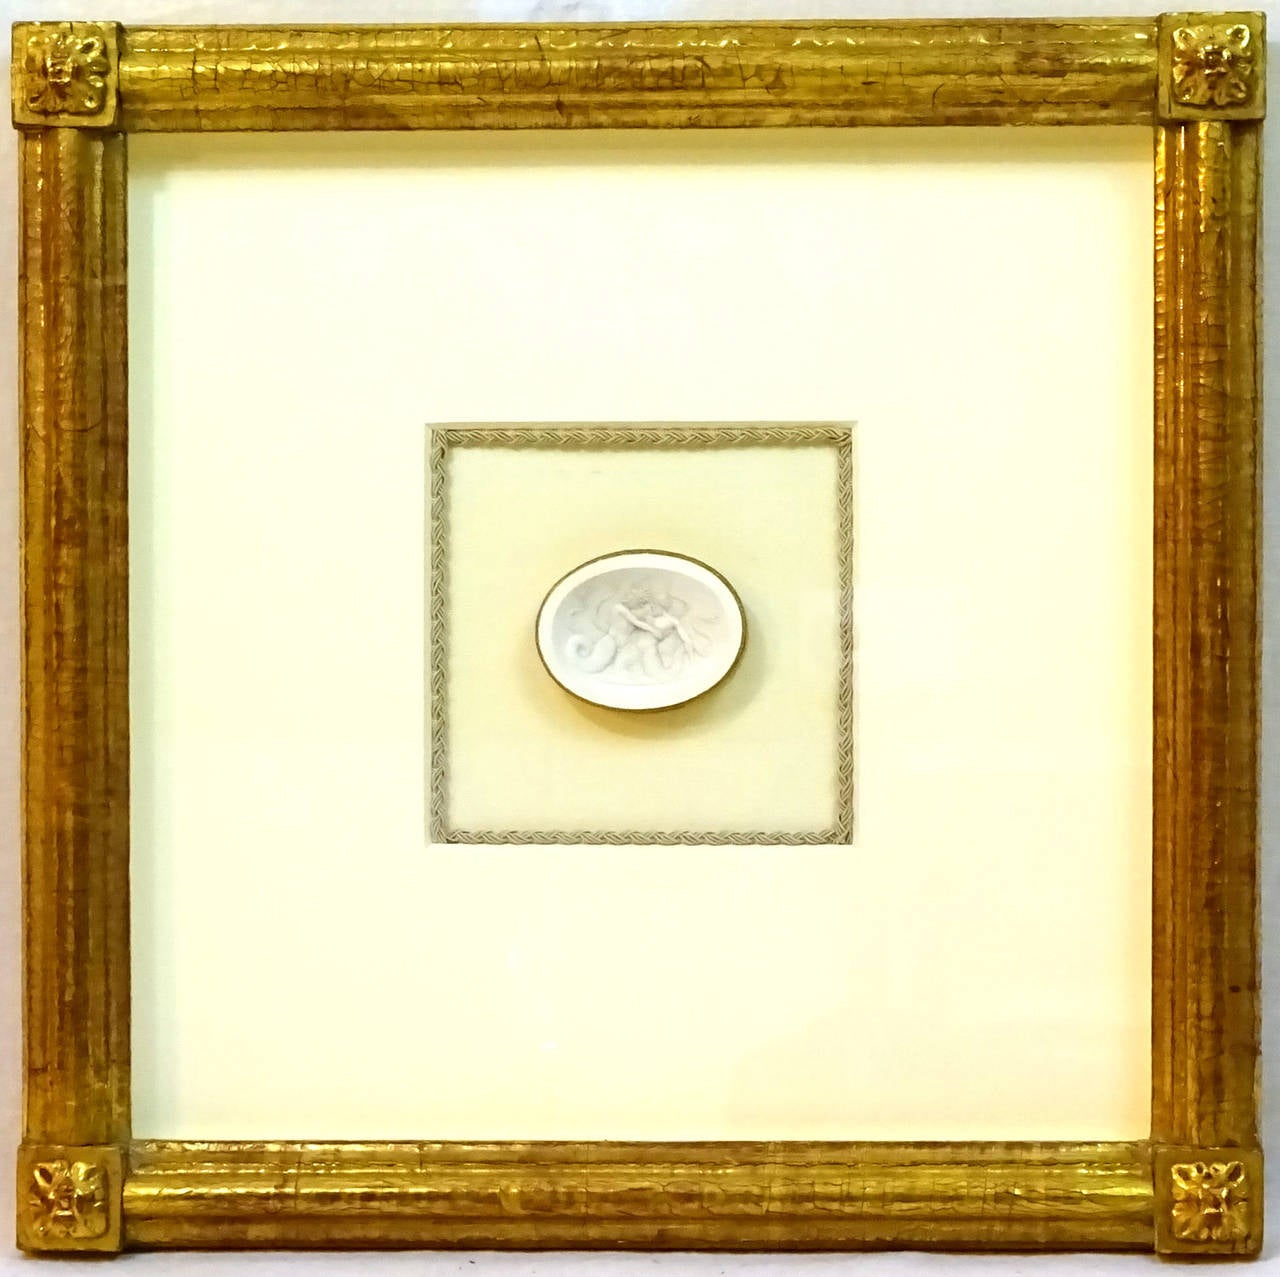 A COLLECTION OF MUSEUM QUALITY FRAMED INTAGLIOS

Individually Handcrafted following 